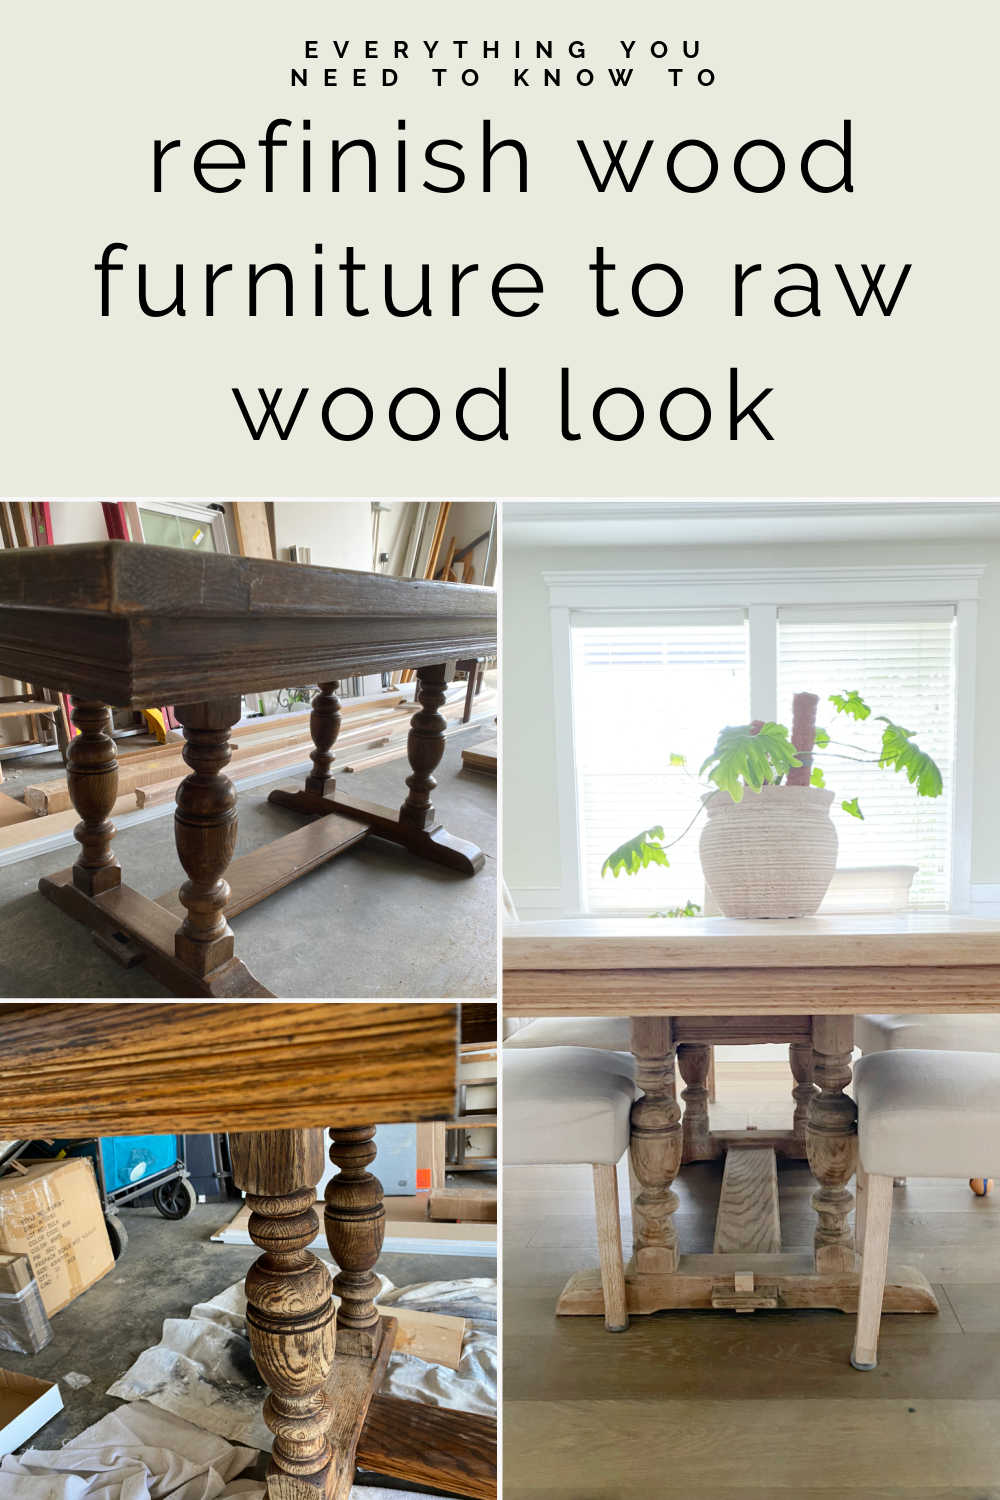 REFINISH TO RAW WOOD LOOK